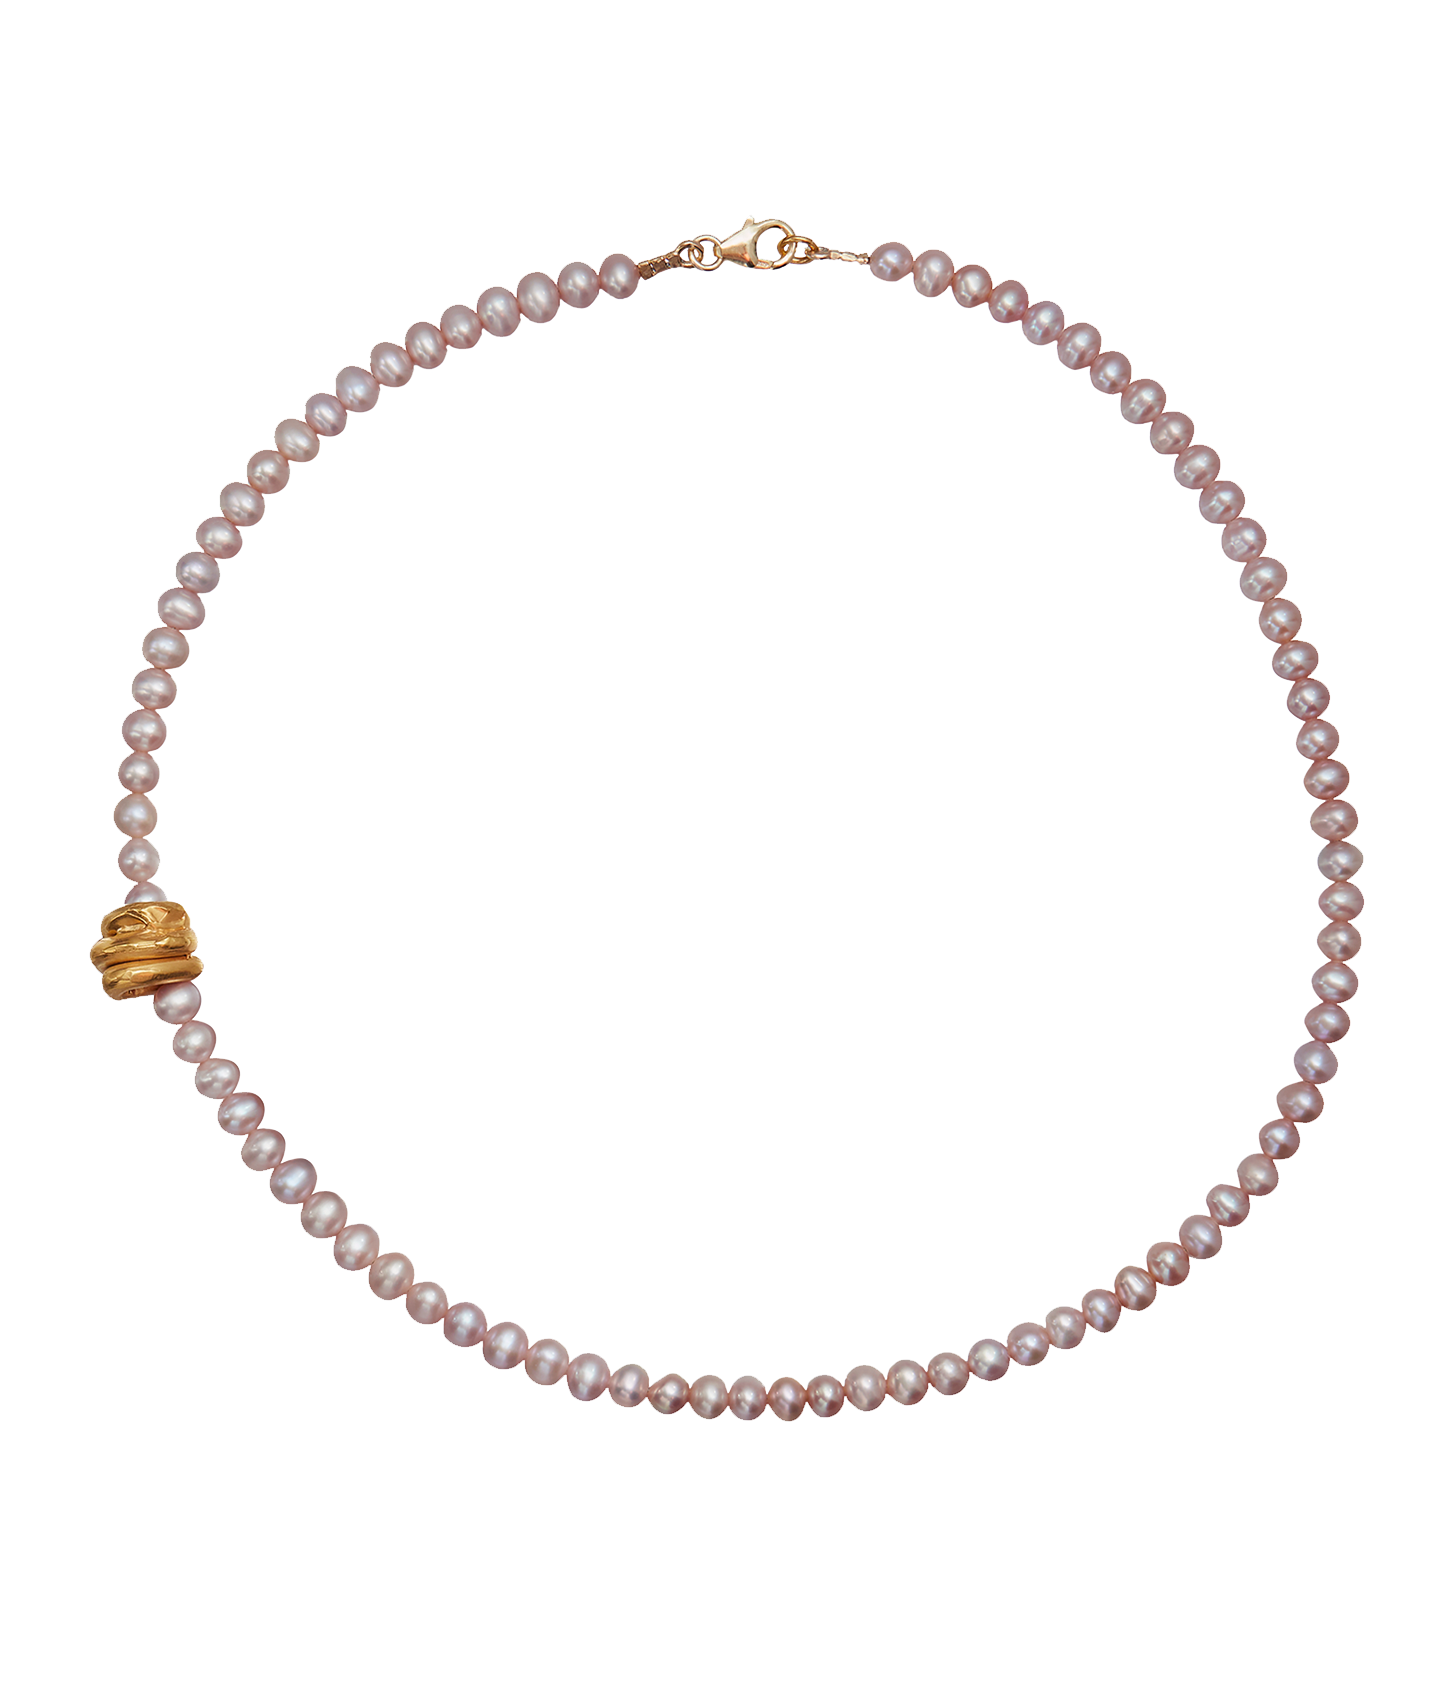 The Celestial Raindrop Pink Pearl Necklace